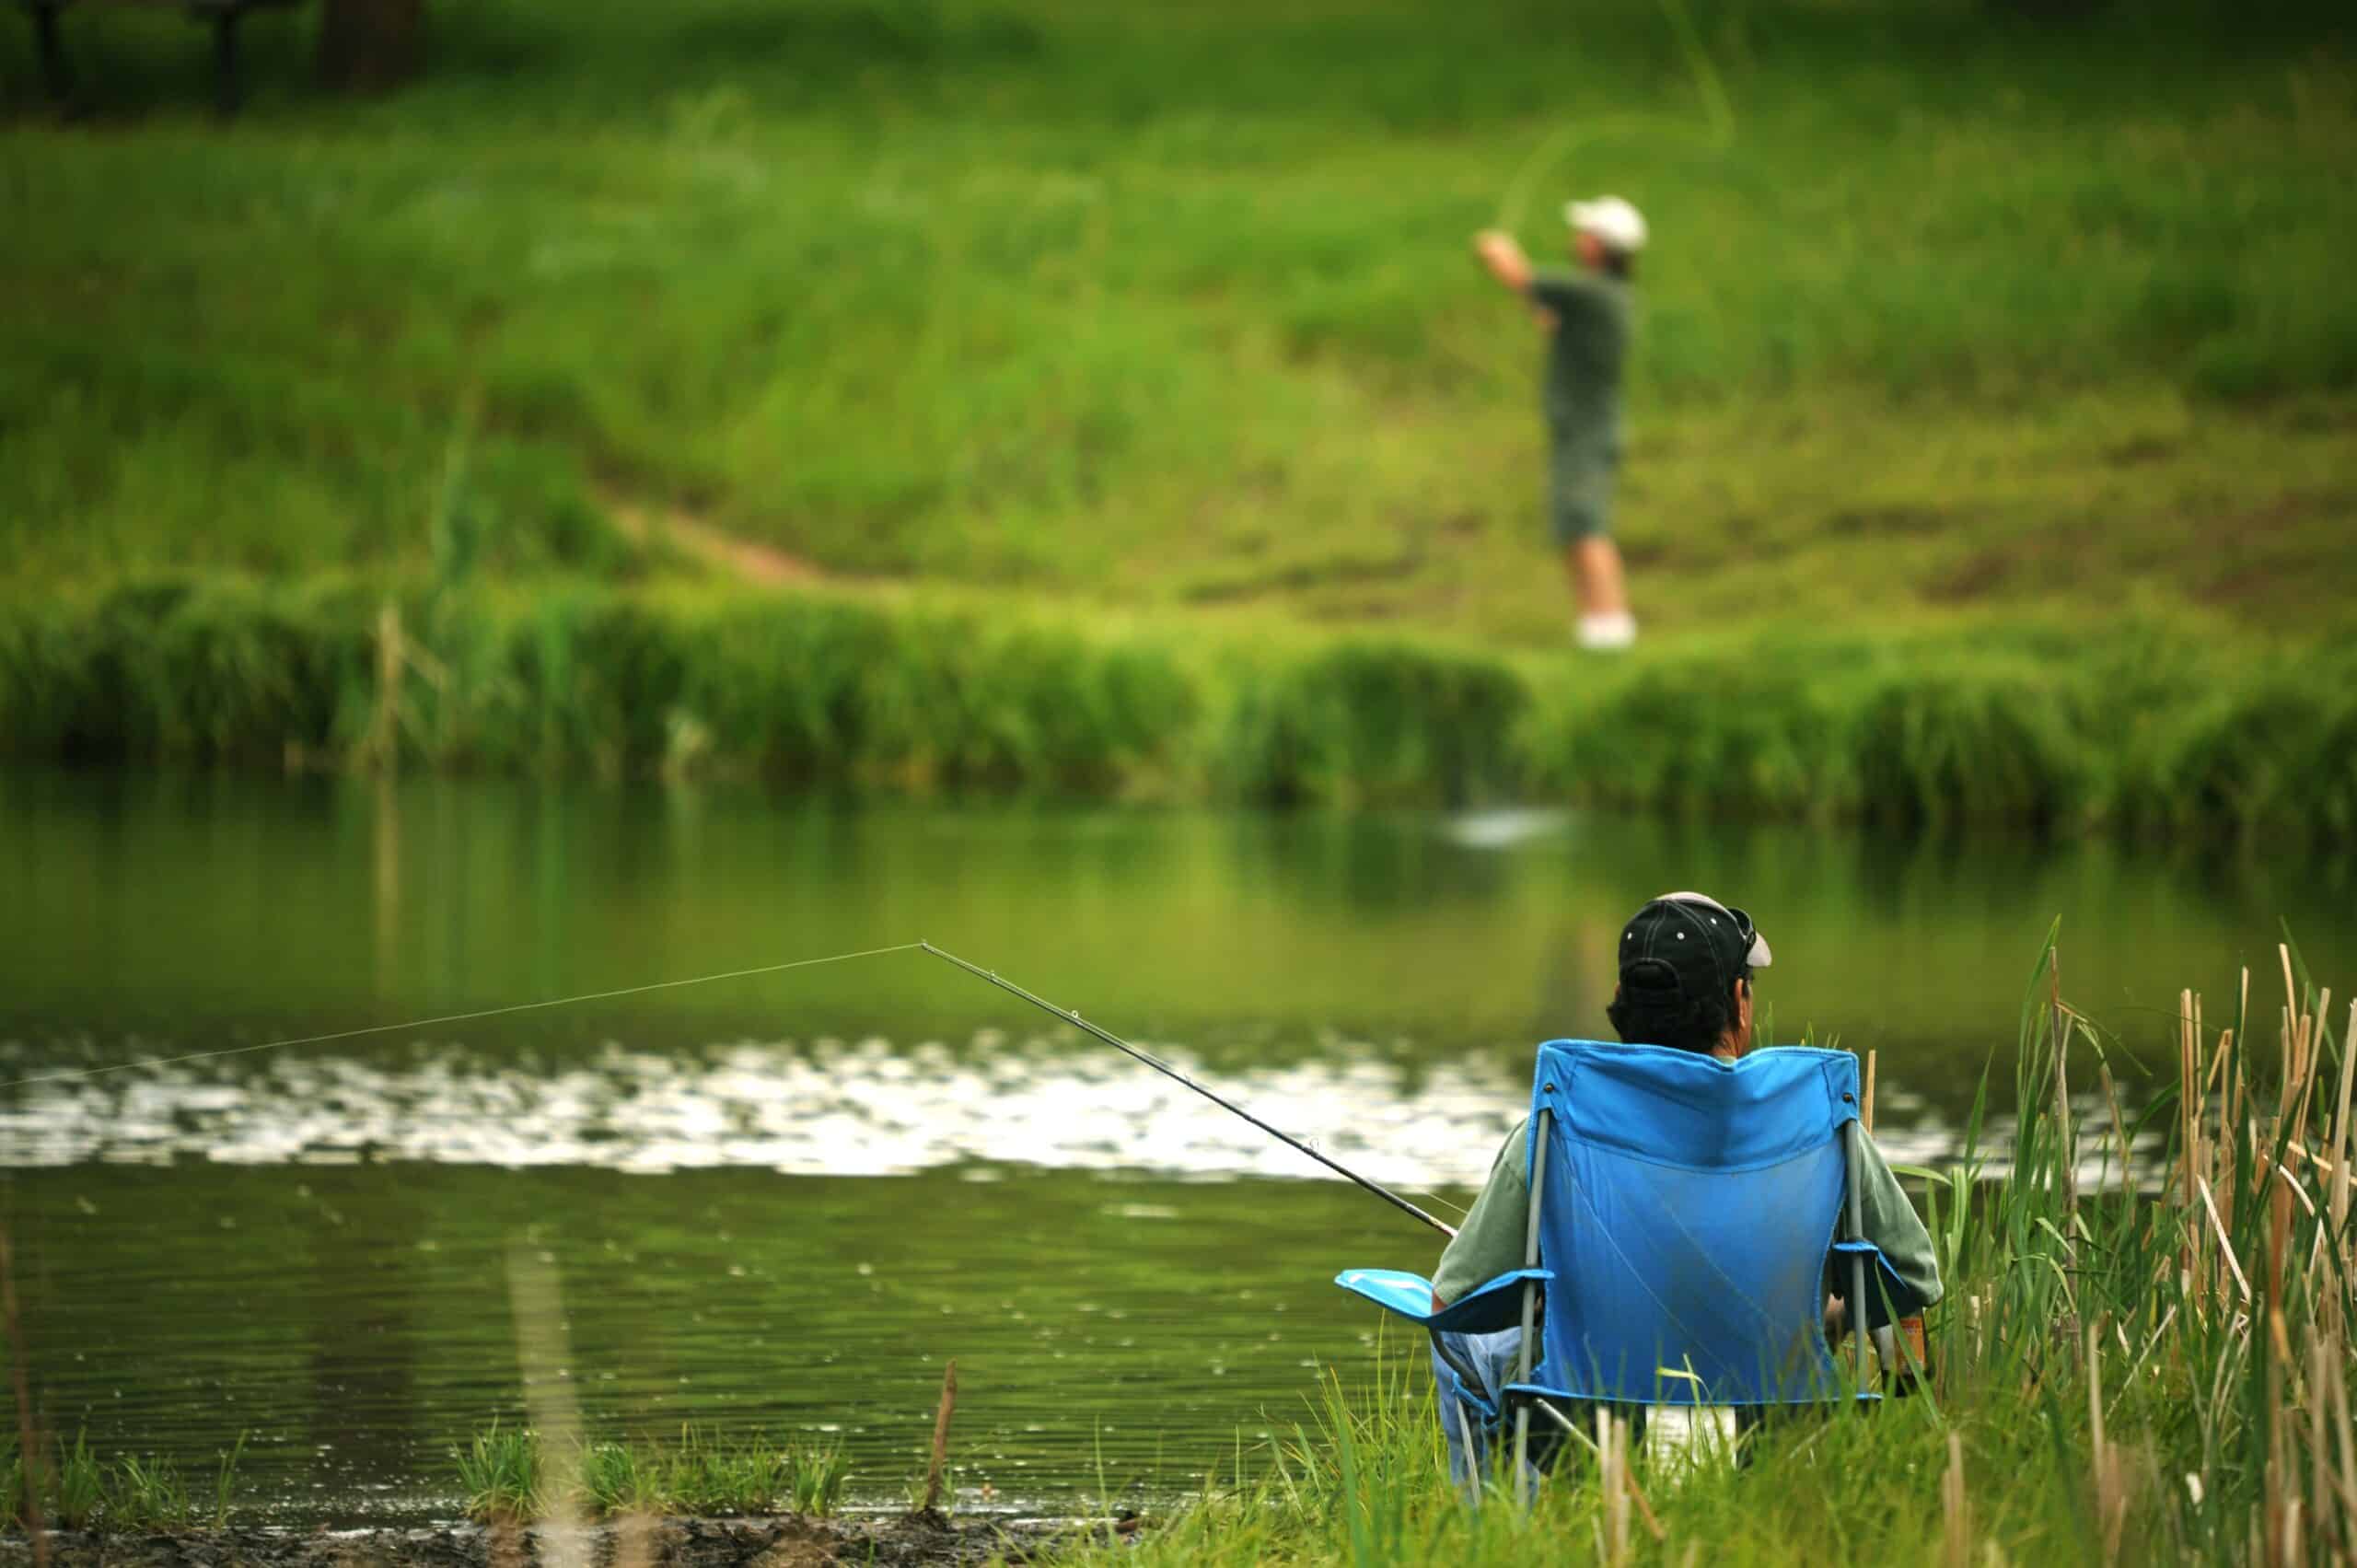 fanatic4fishing.com : Do you need a fishing license to fish in a pond in Texas?